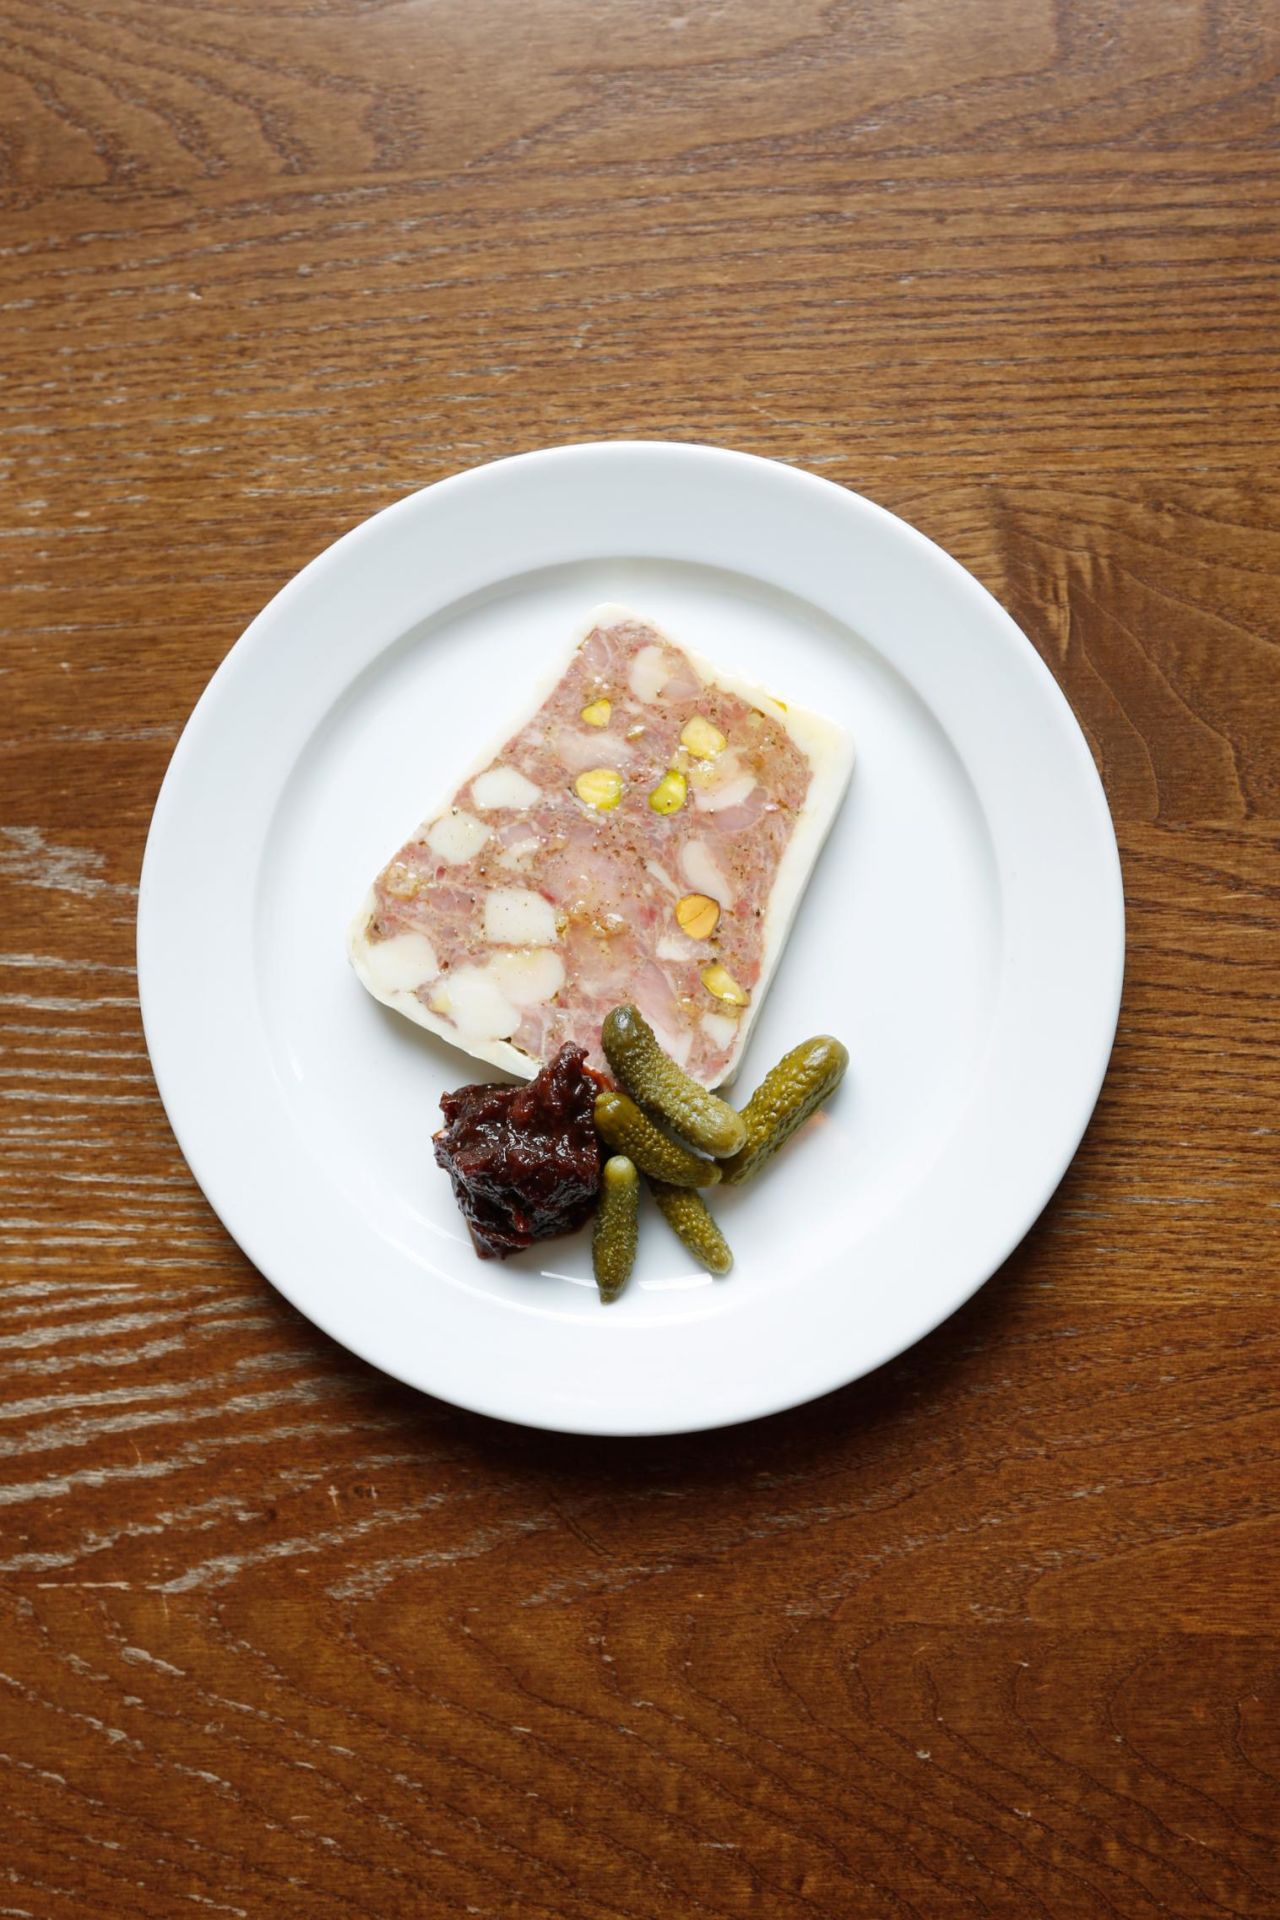 This terrine is made at St. John restaurant using whichever parts are to hand at the time of making. This can be pig liver or heart but can also include rabbit offal and game offal.